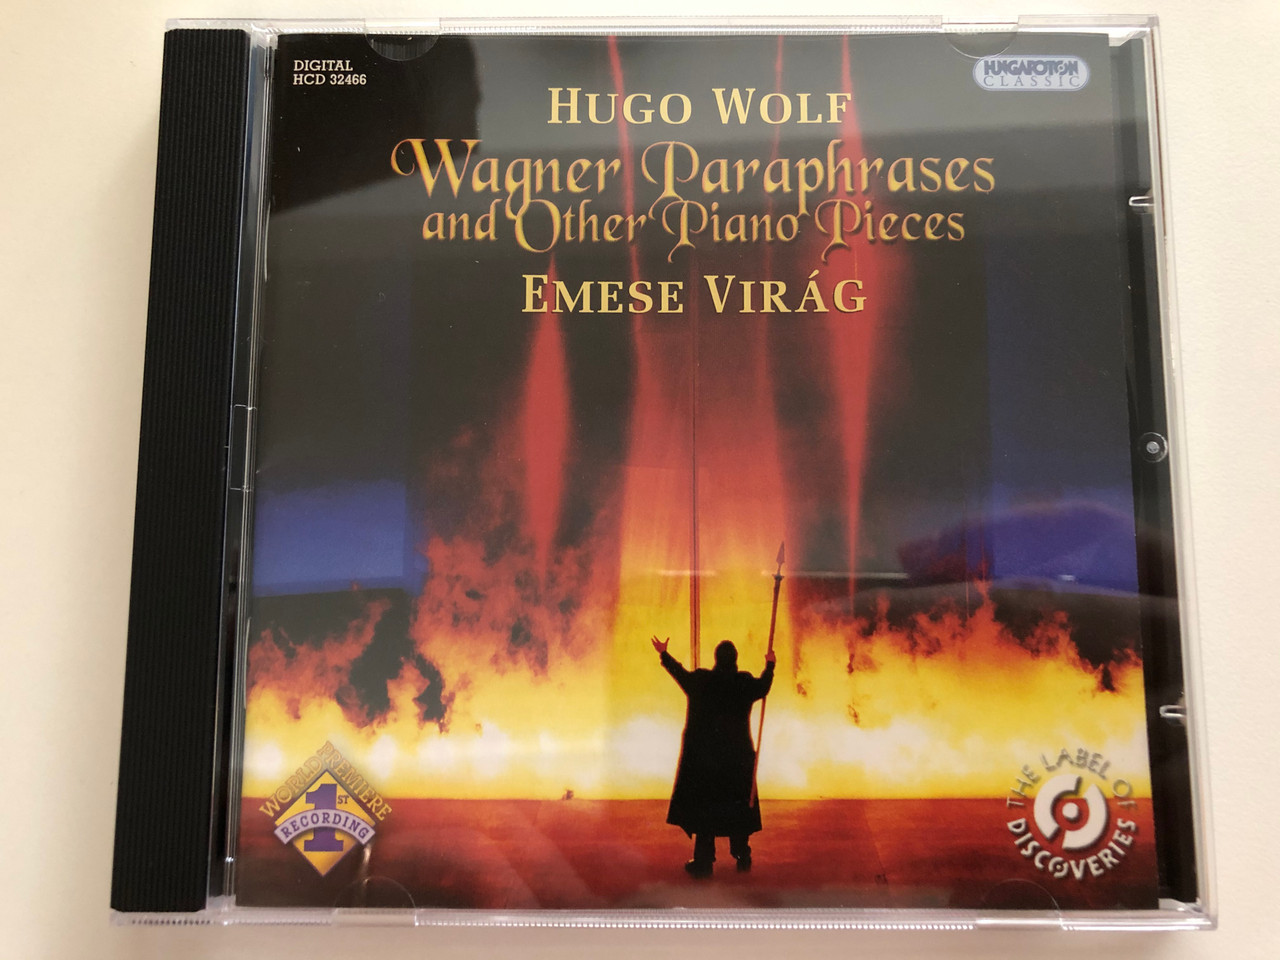 https://cdn10.bigcommerce.com/s-62bdpkt7pb/products/31096/images/183146/Hugo_Wolf_-_Wagner_Paraphrases_and_Other_Piano_Pieces_Emese_Virag_Hungaroton_Classic_Audio_CD_2008_Stereo_HCD_32466_1__48479.1625135828.1280.1280.JPG?c=2